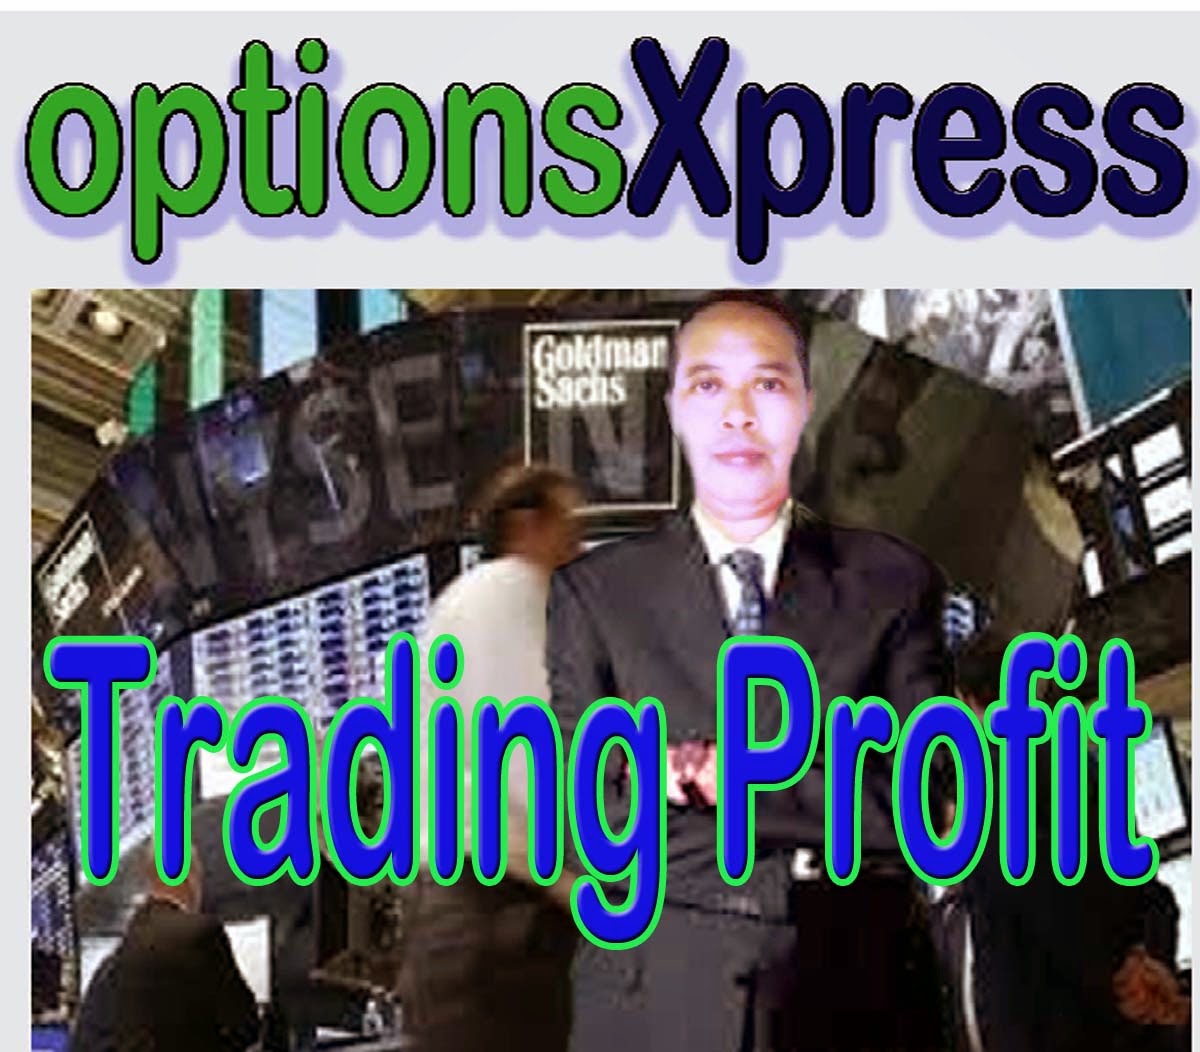 forex industry in india forex industry in india